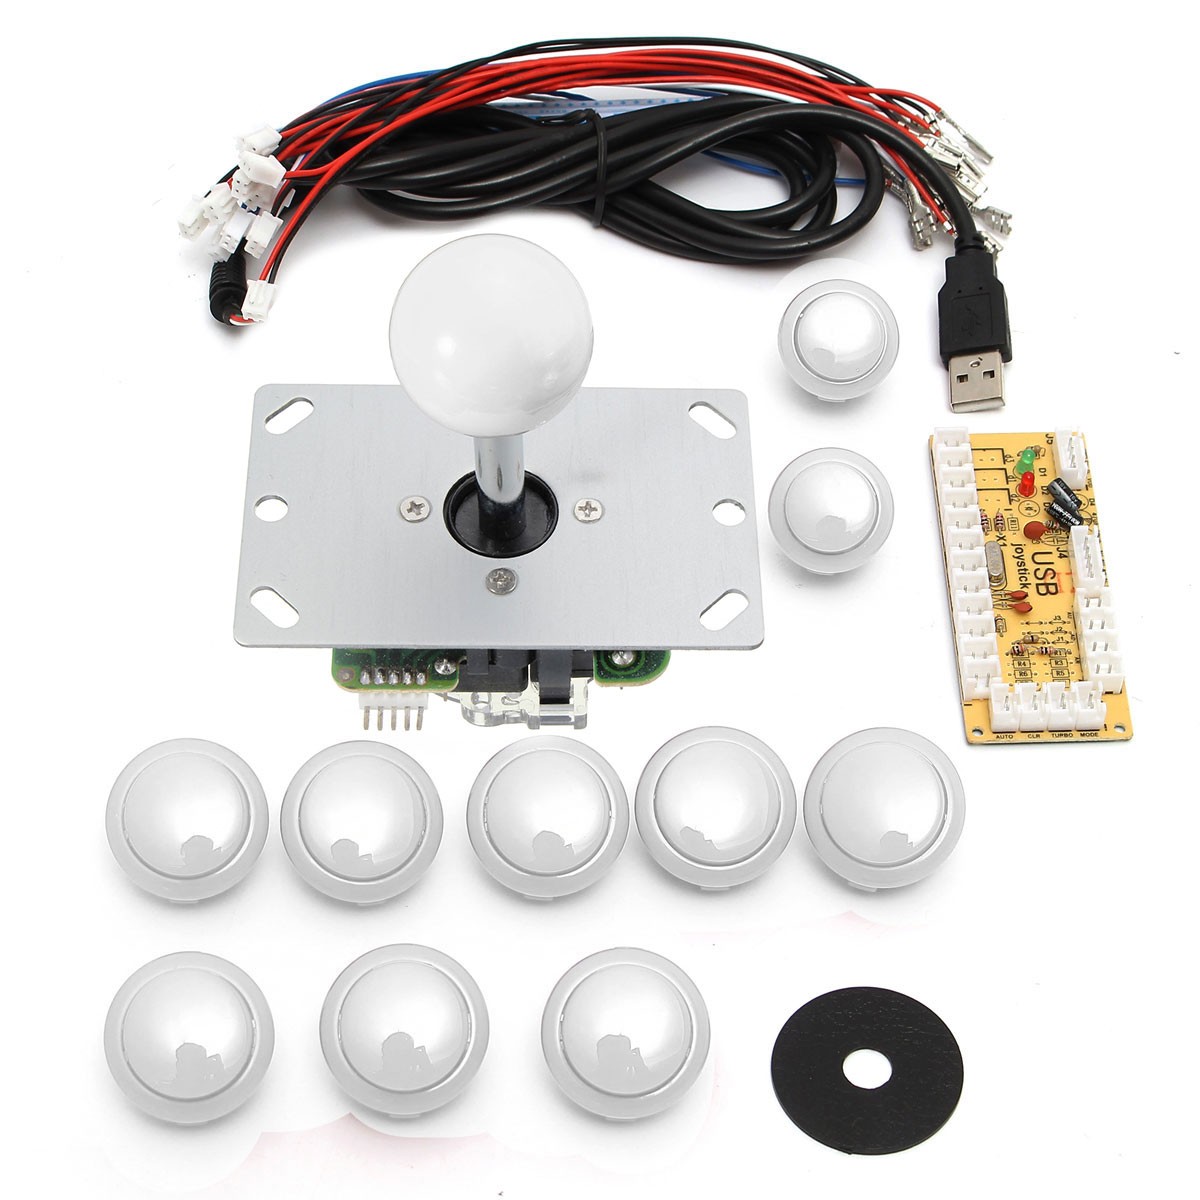 

2Pcs White Game DIY Arcade Game Console Set Kits Replacement Parts USB Encoder to PC Joystick and Buttons